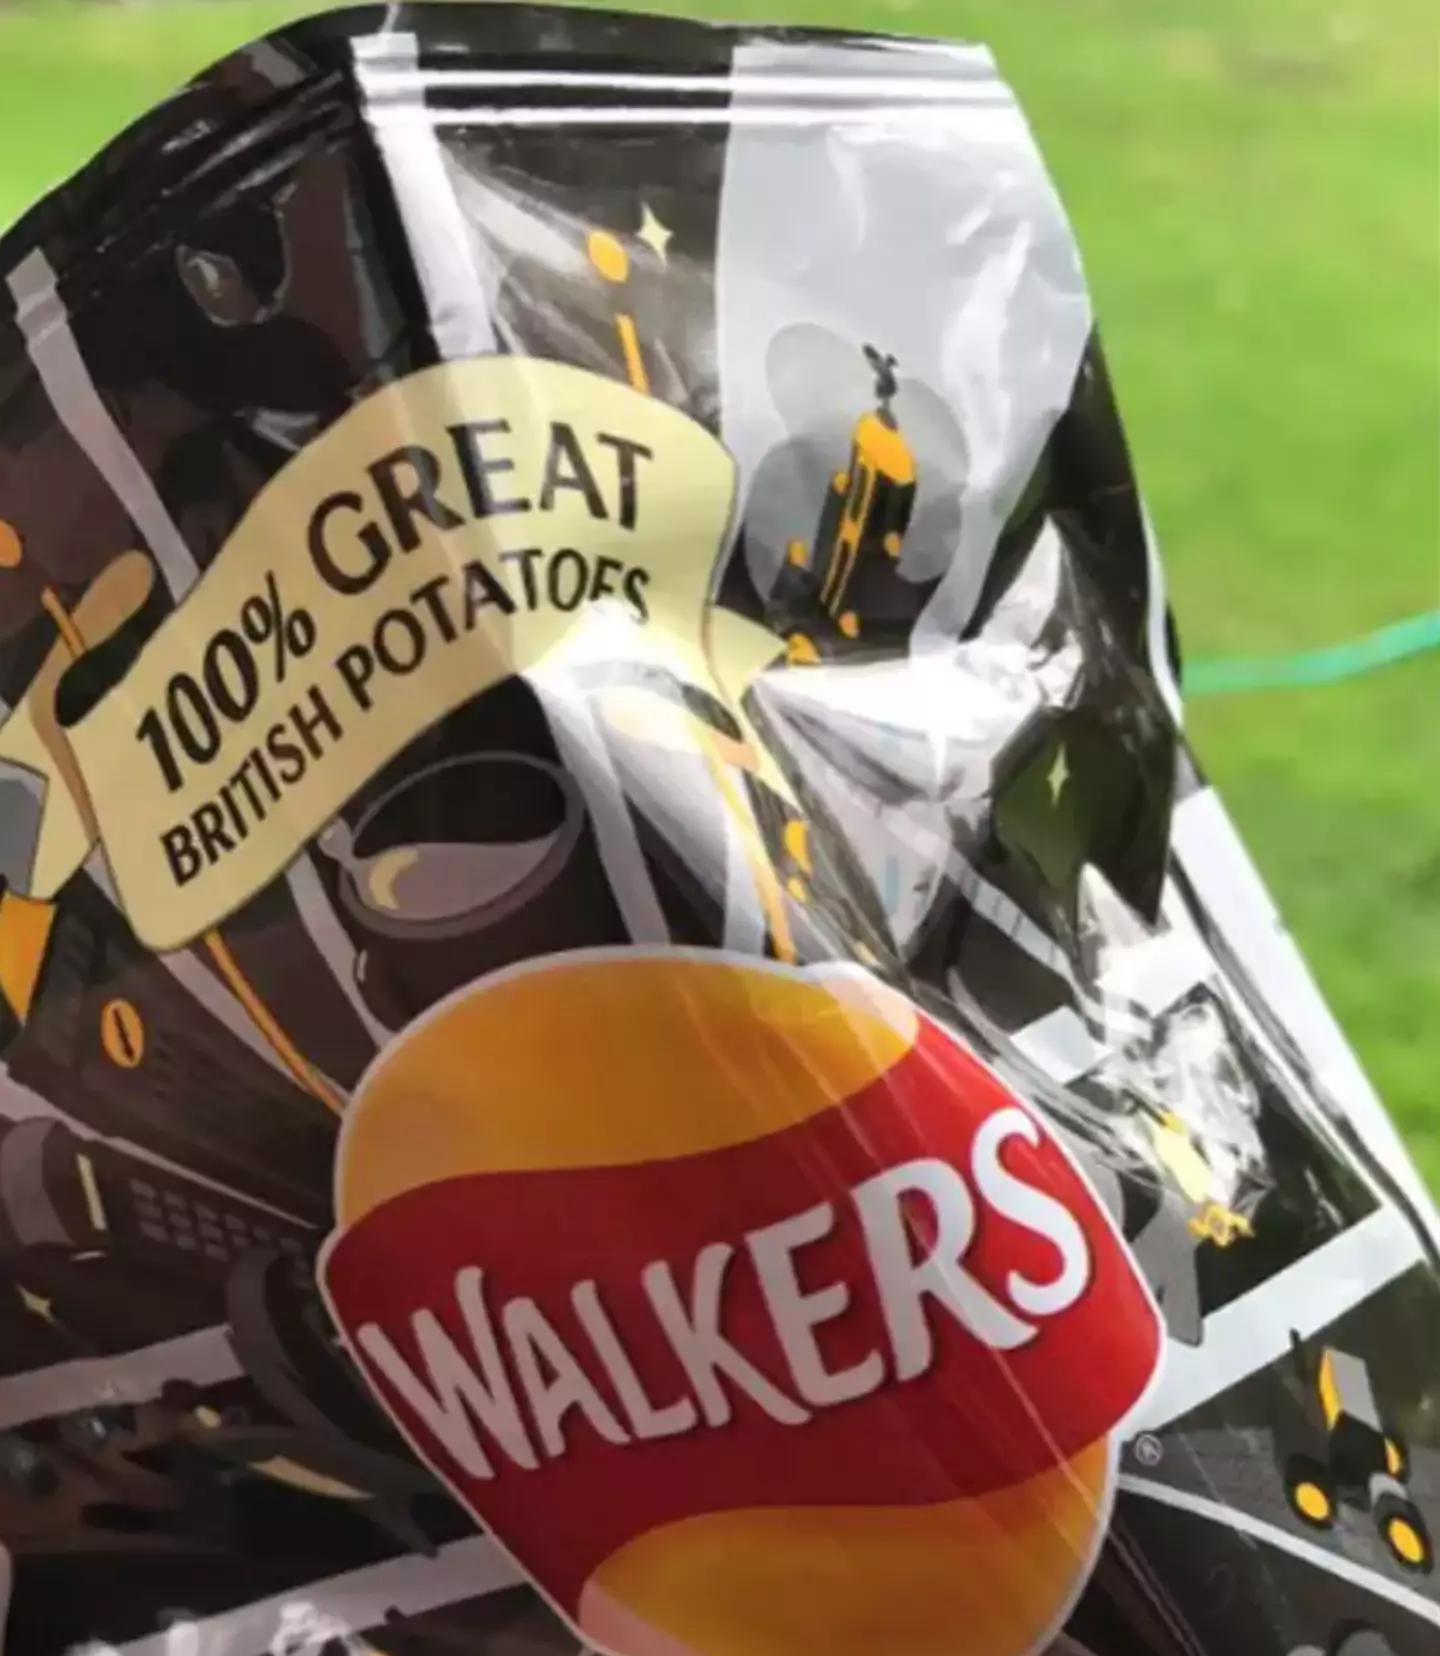 The company has also announced that it's axing Walkers Marmite.